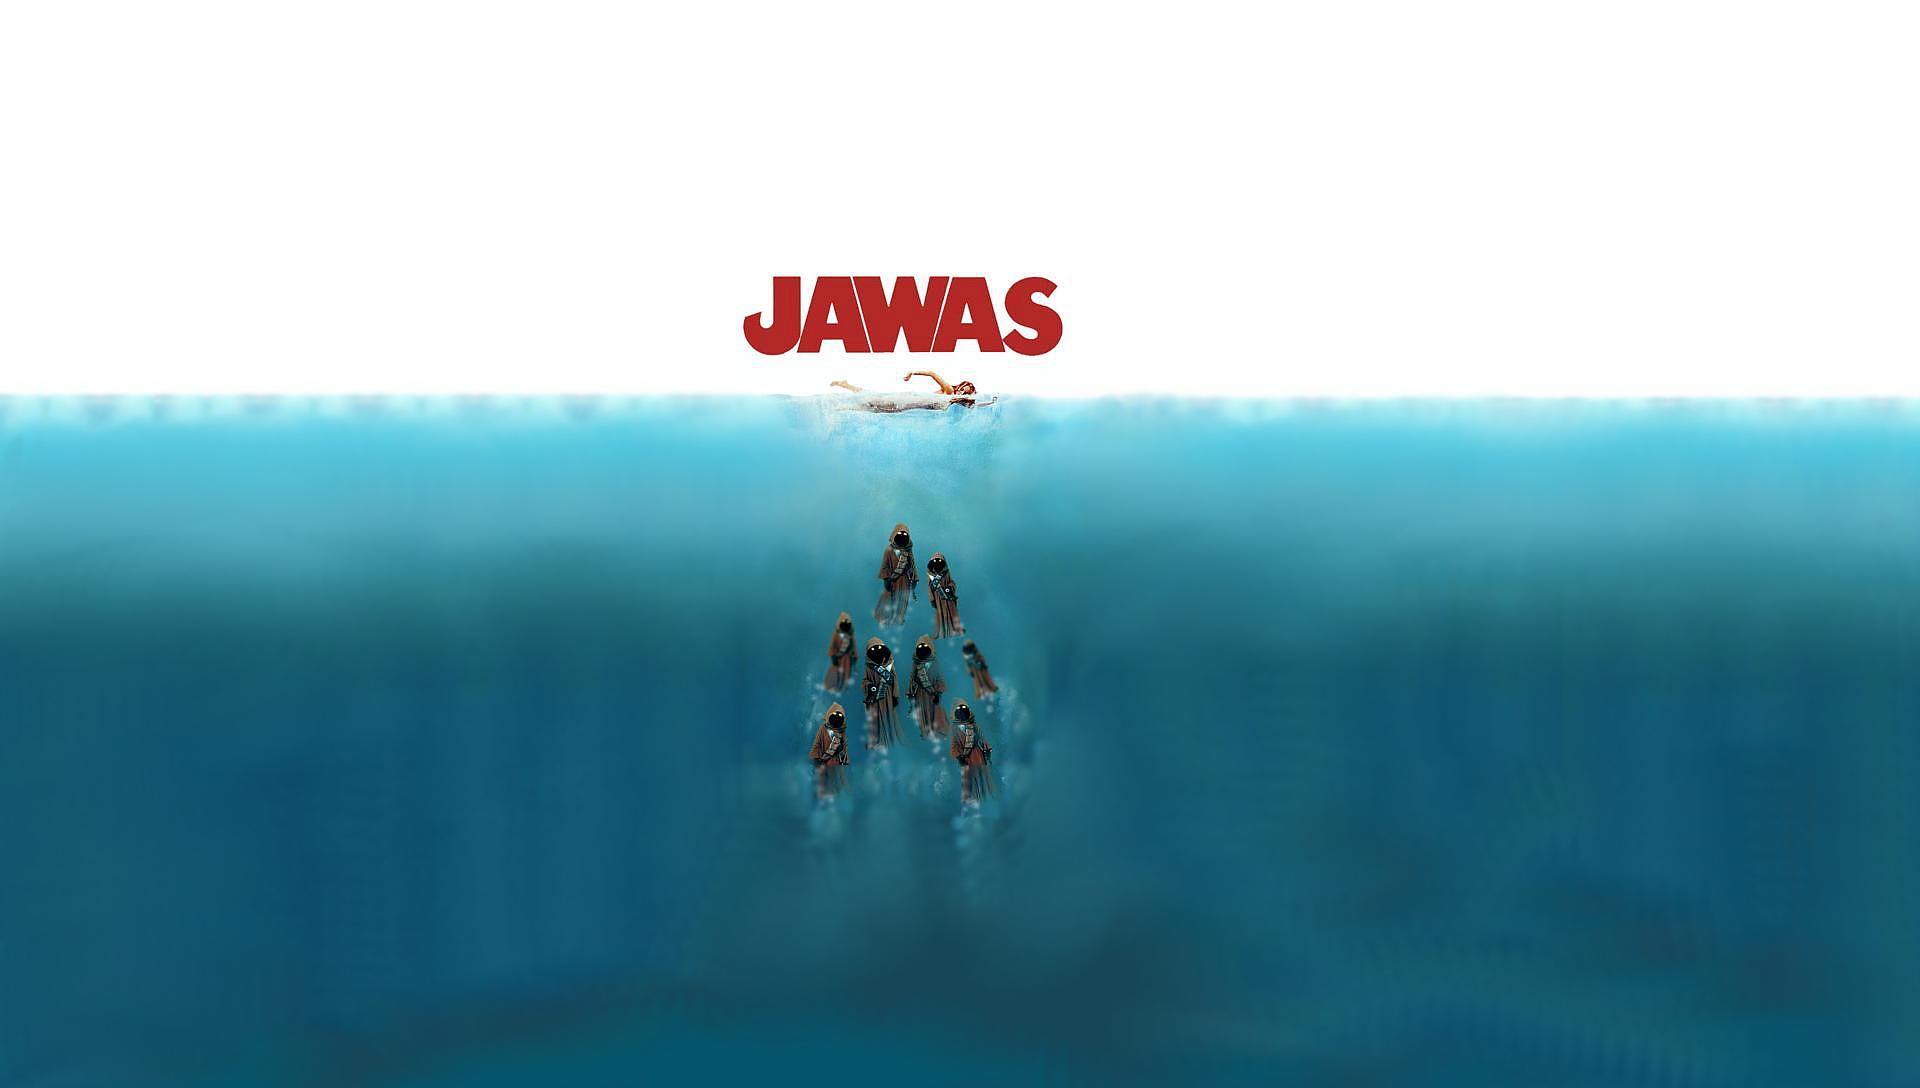 Jaws HD Wallpapers Backgrounds 1920x1088